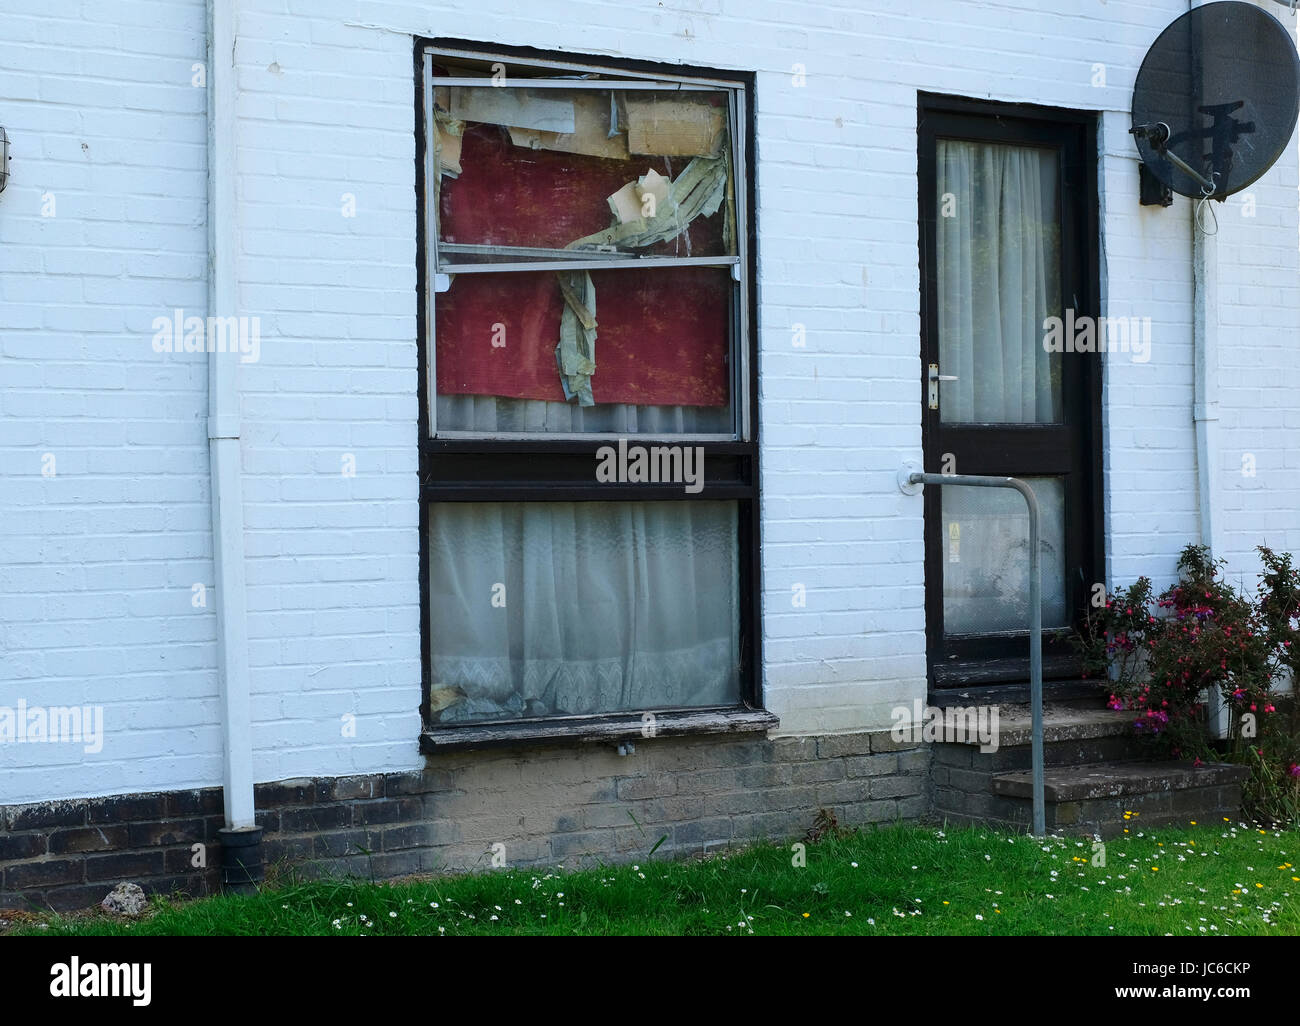 Badly maintained home with collapsed aluminium sash windows stuffed with paper and blankets to keep out the cold. West Sussex, UK Stock Photo